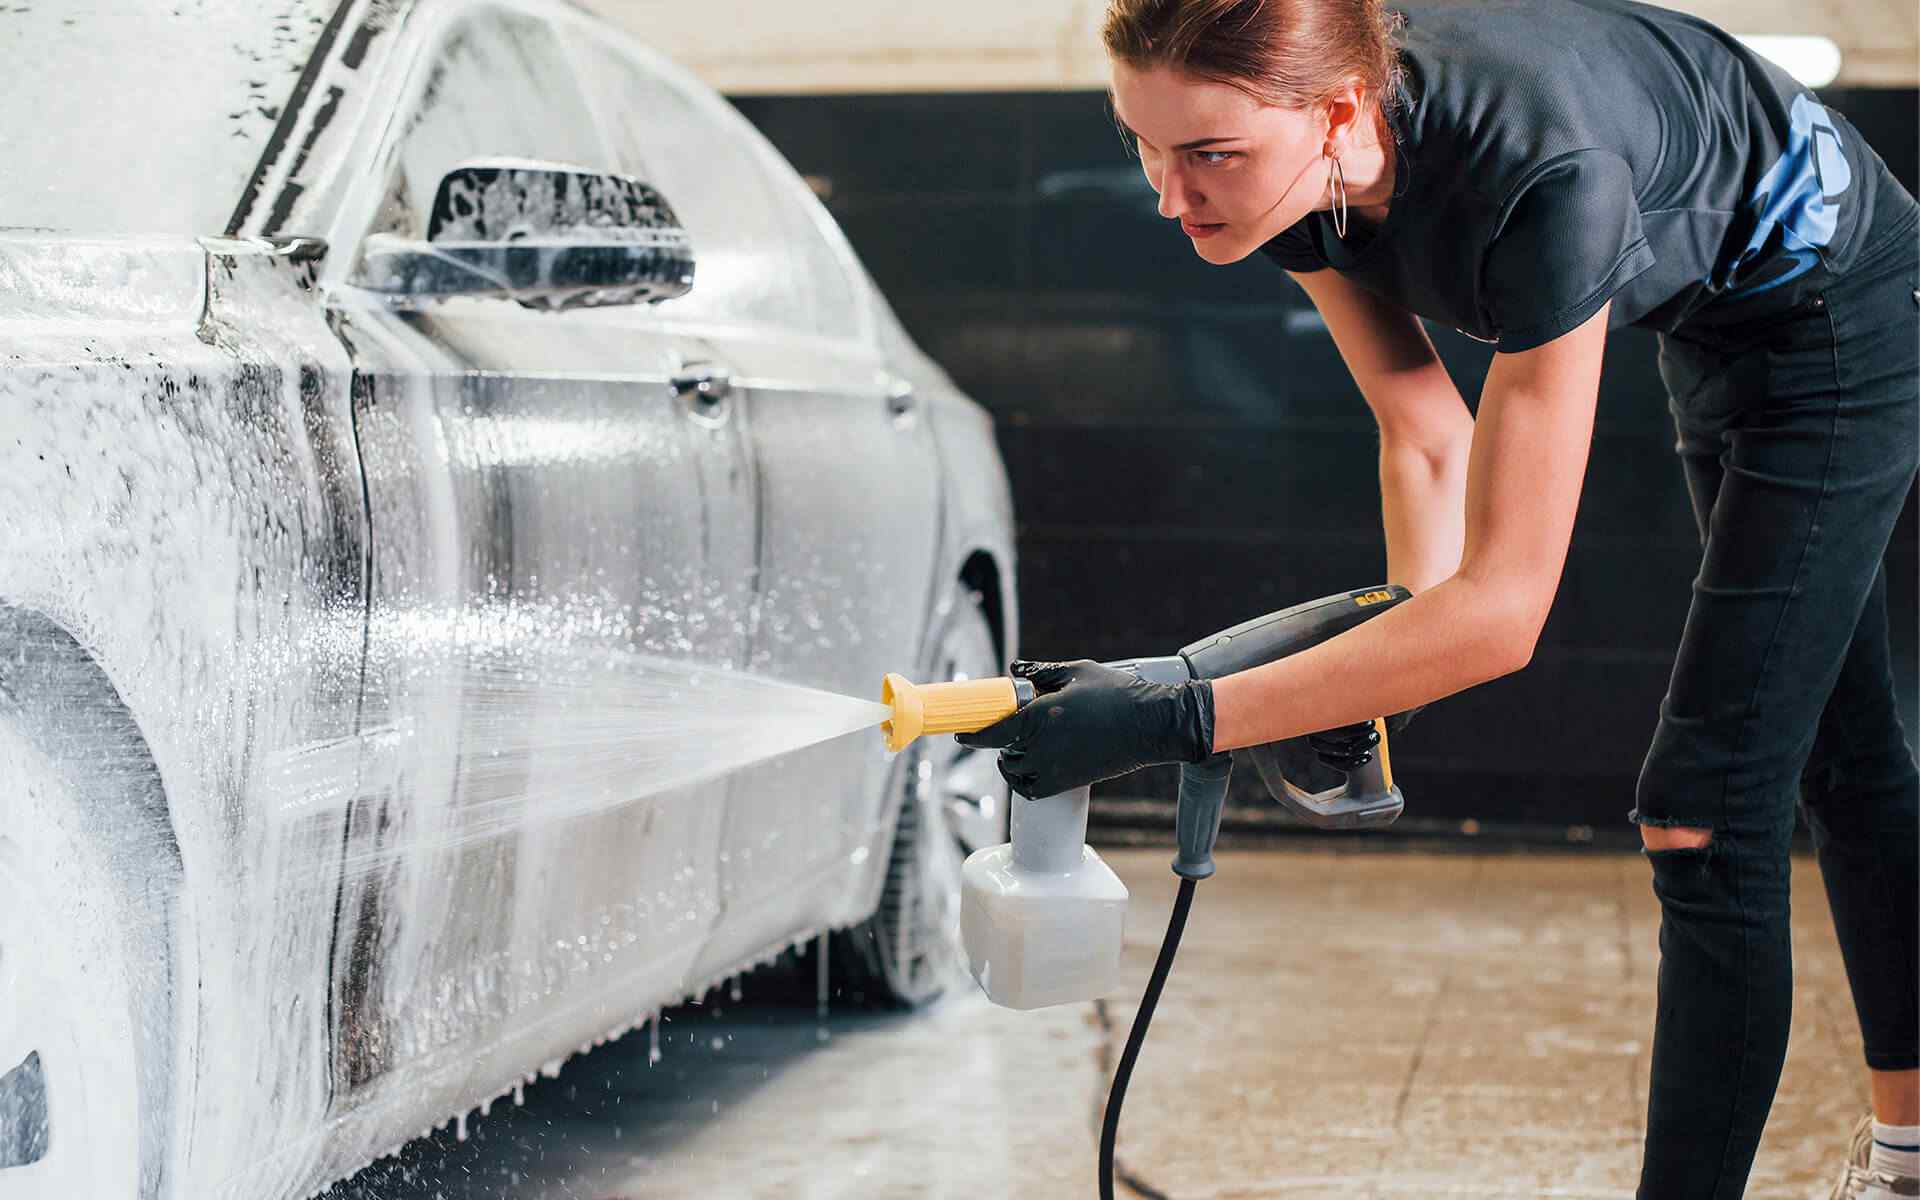 How to wash your car properly